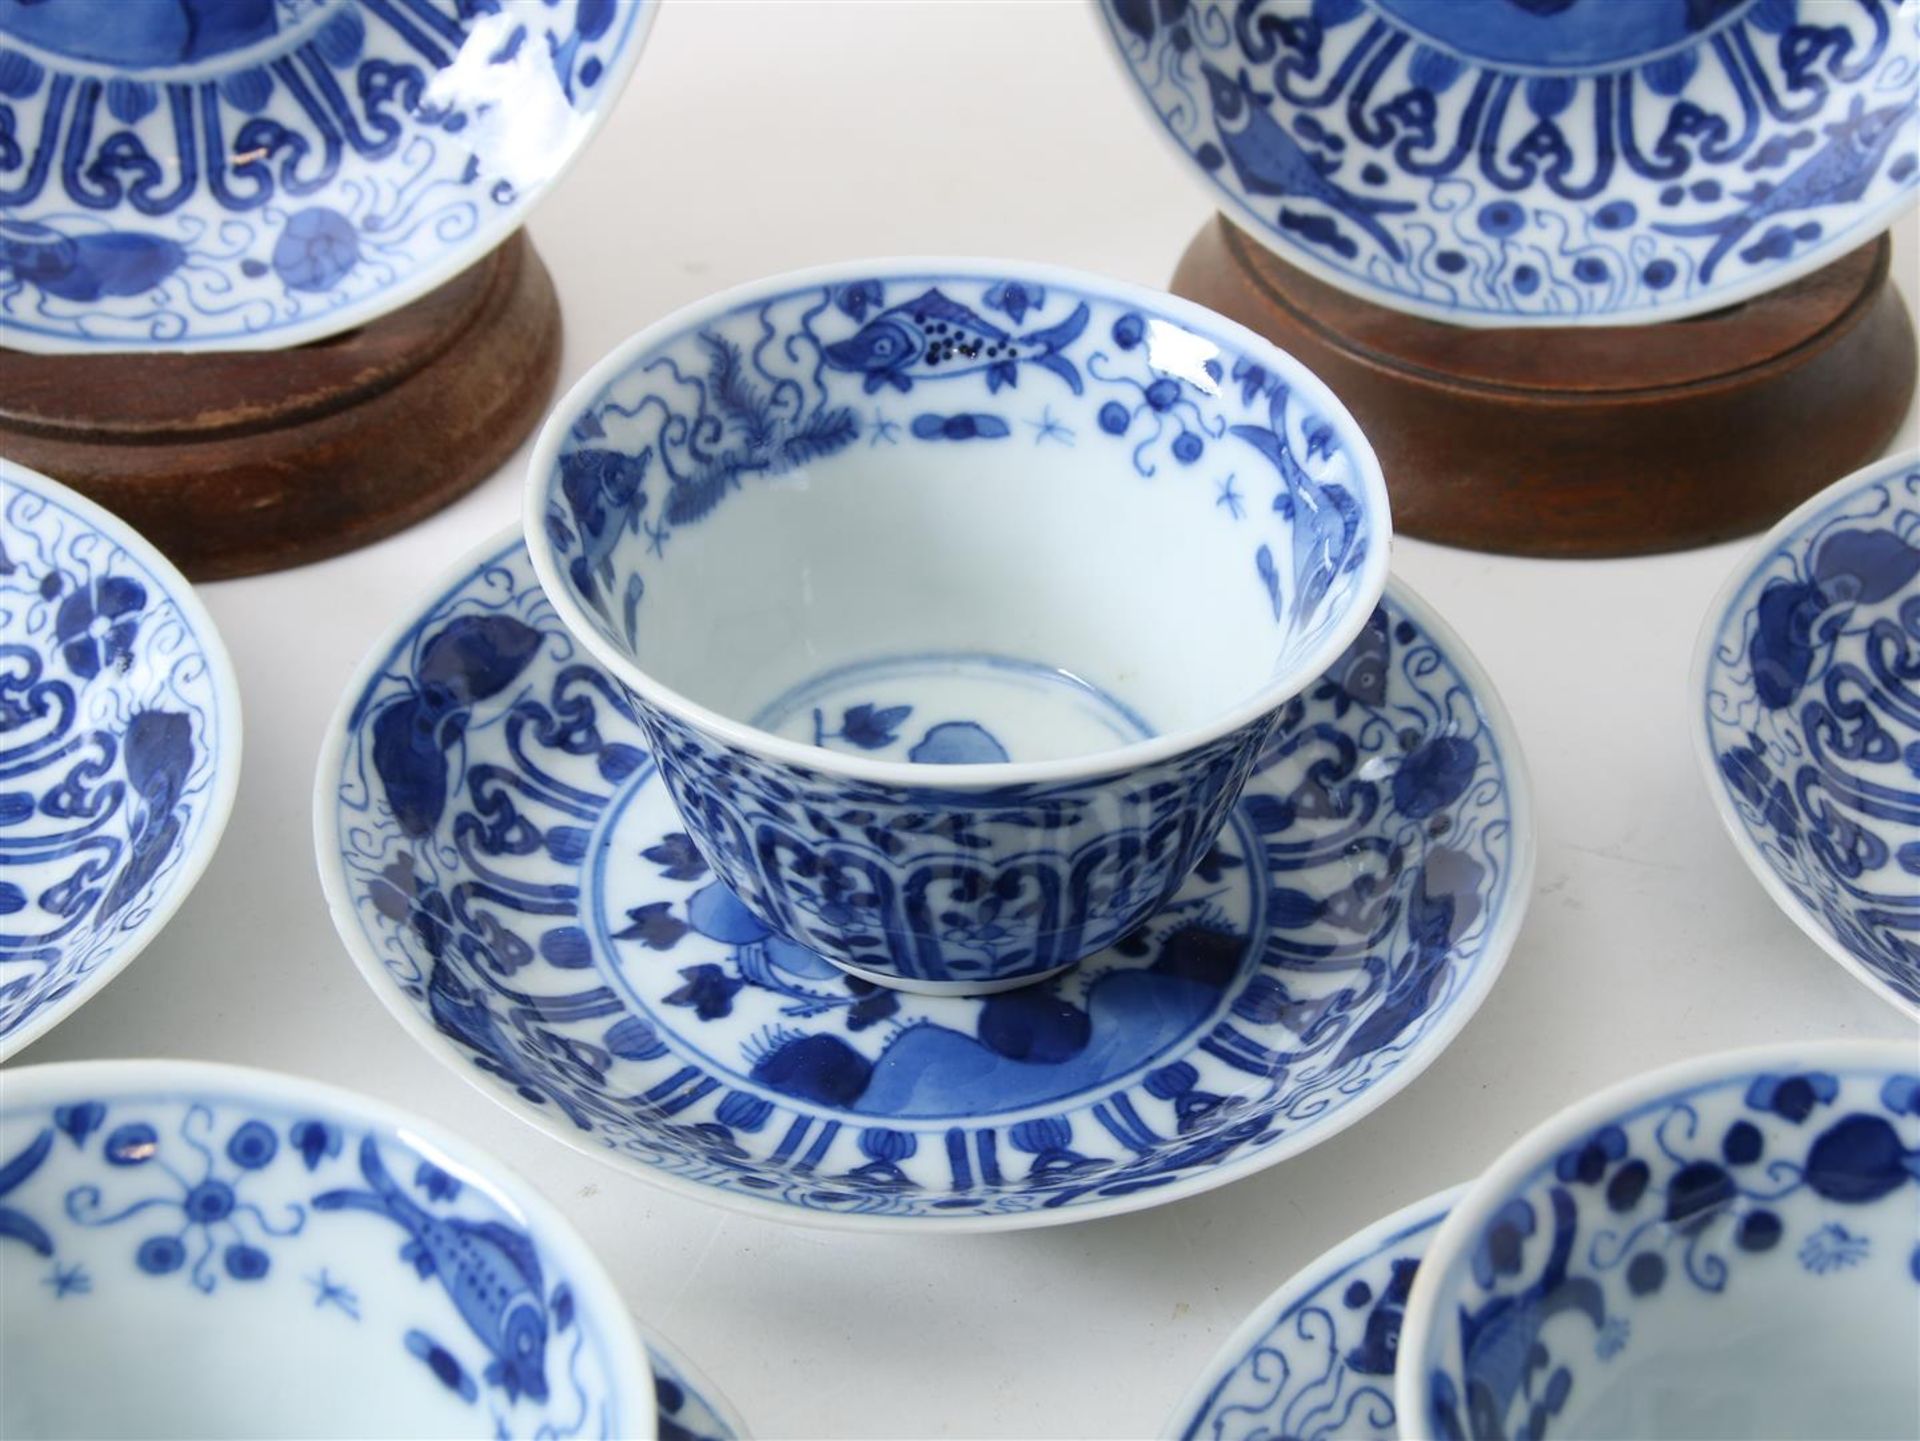 Lot of 12 porcelain cups and 11 saucers decorated in blue with perch and butterfly decor, China - Image 7 of 19